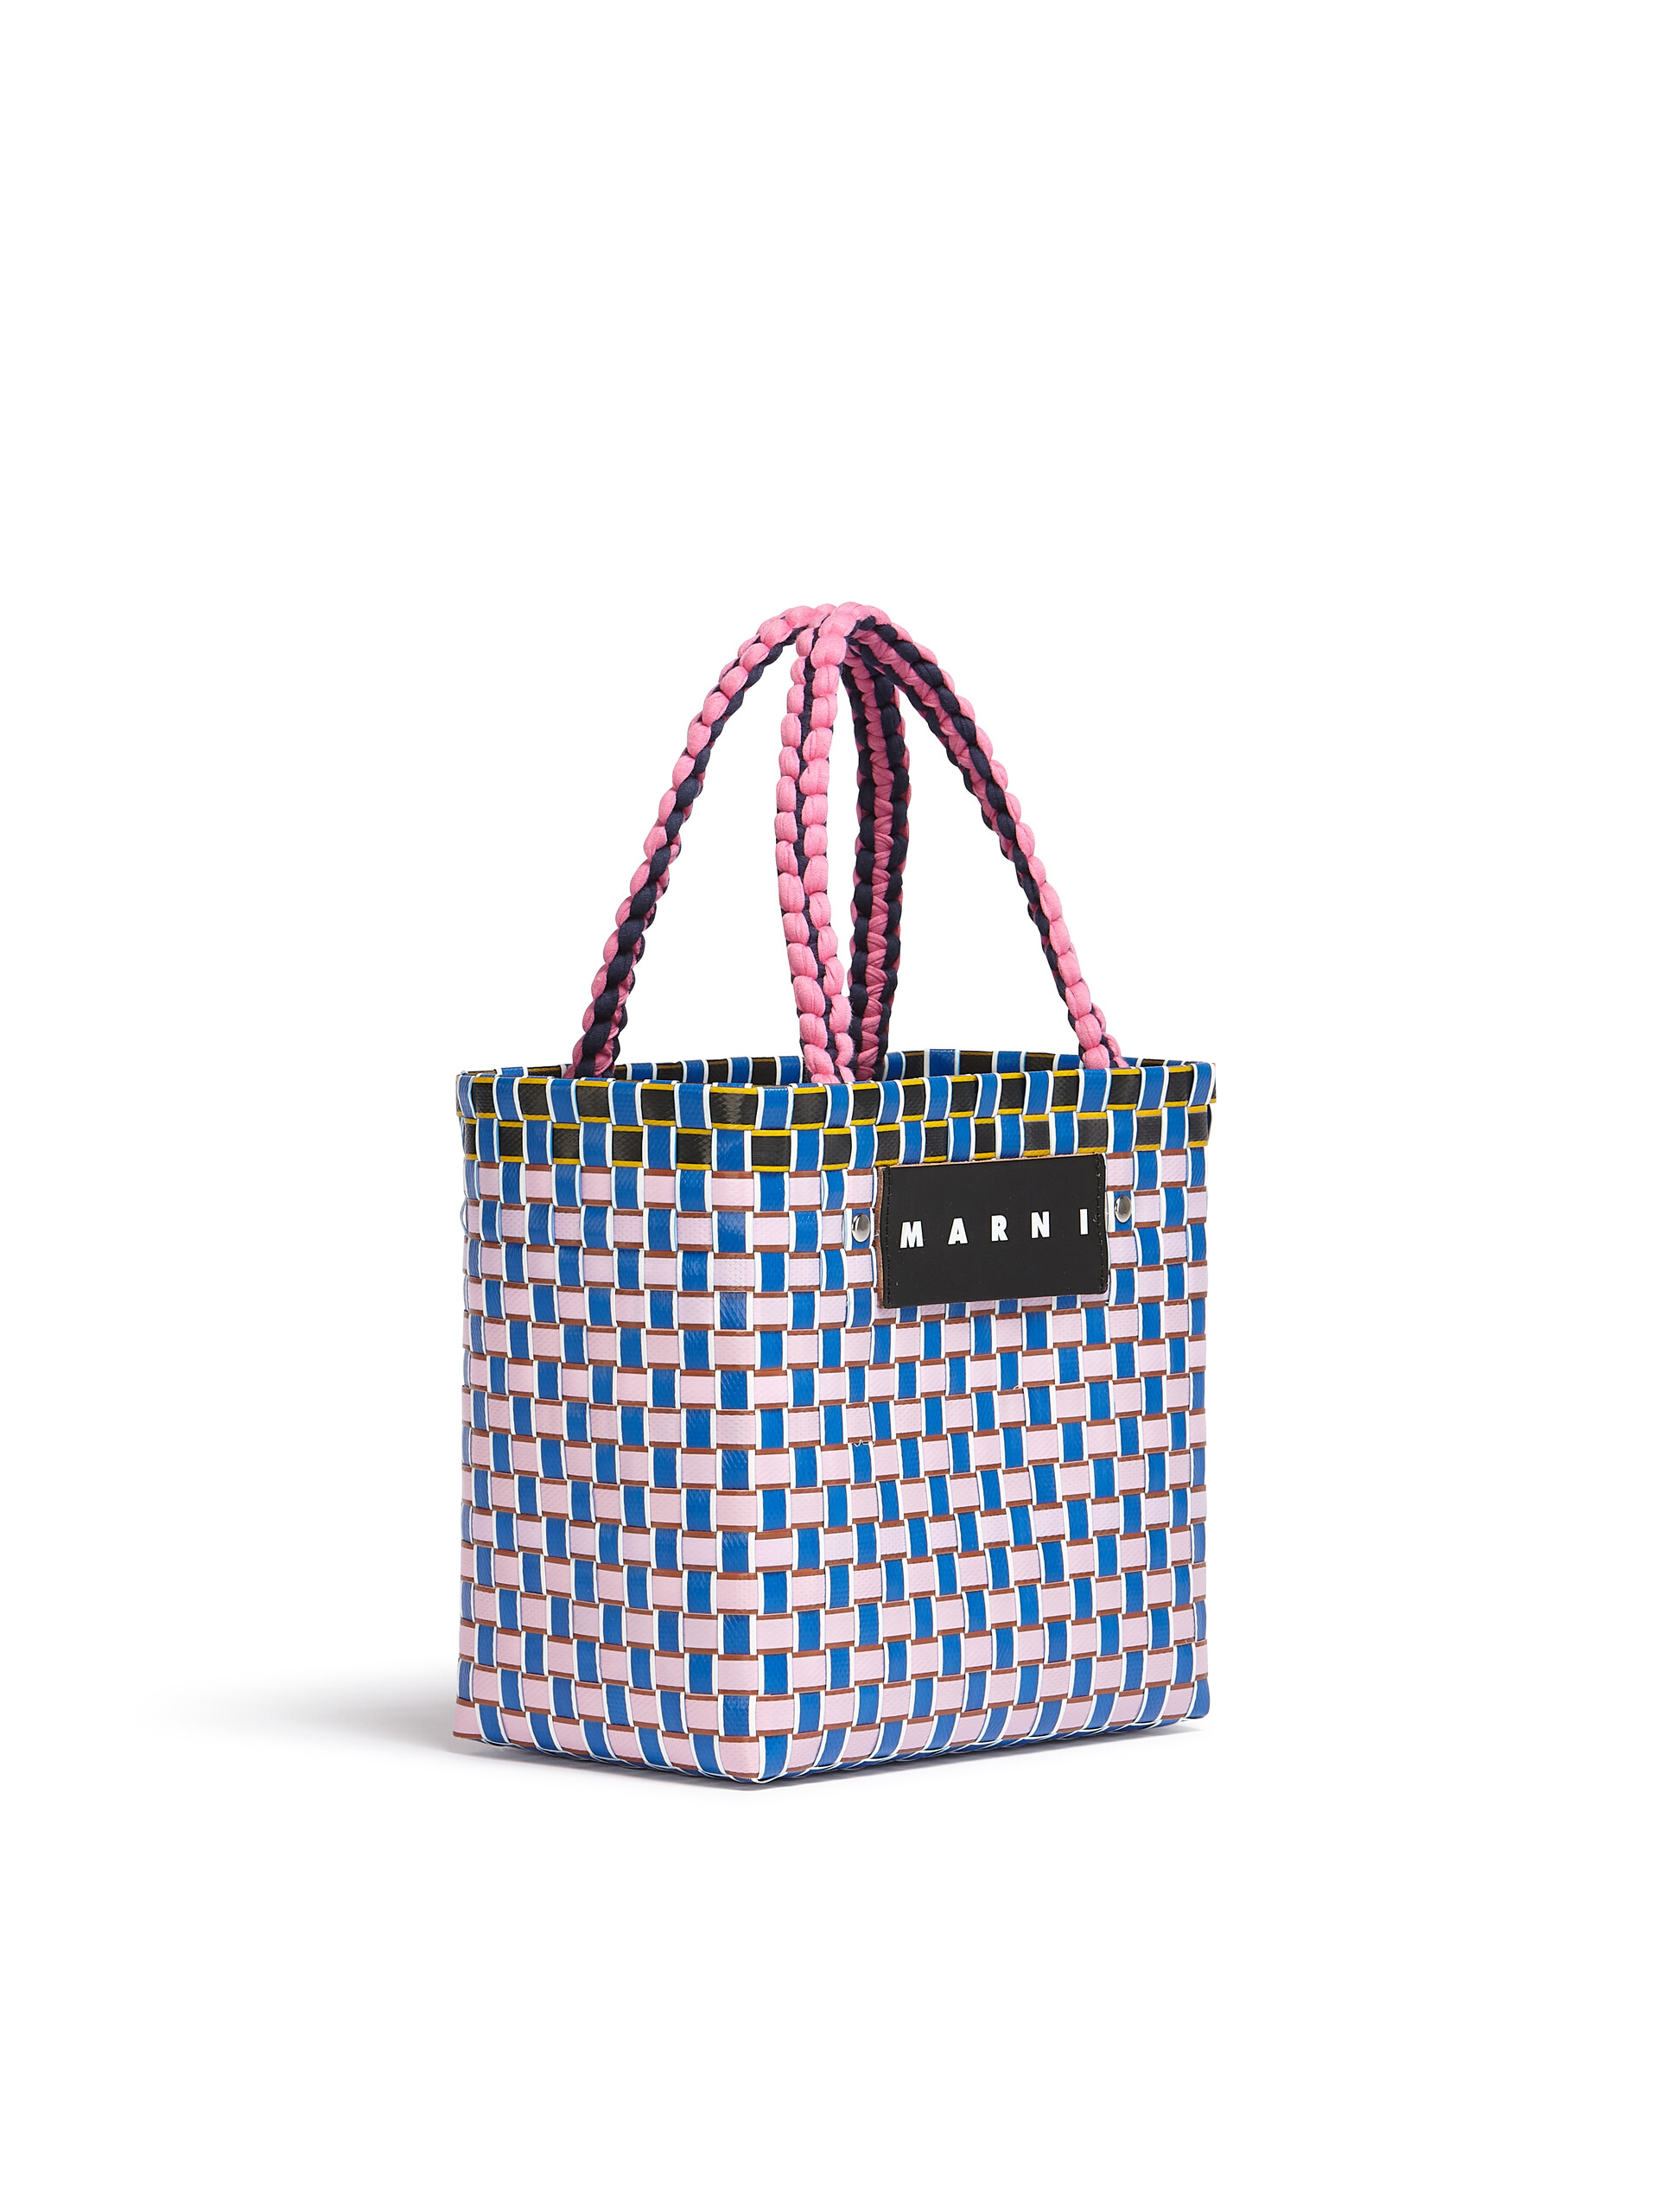 MARNI MARKET BASKET bag in pink square woven material - Bags - Image 2